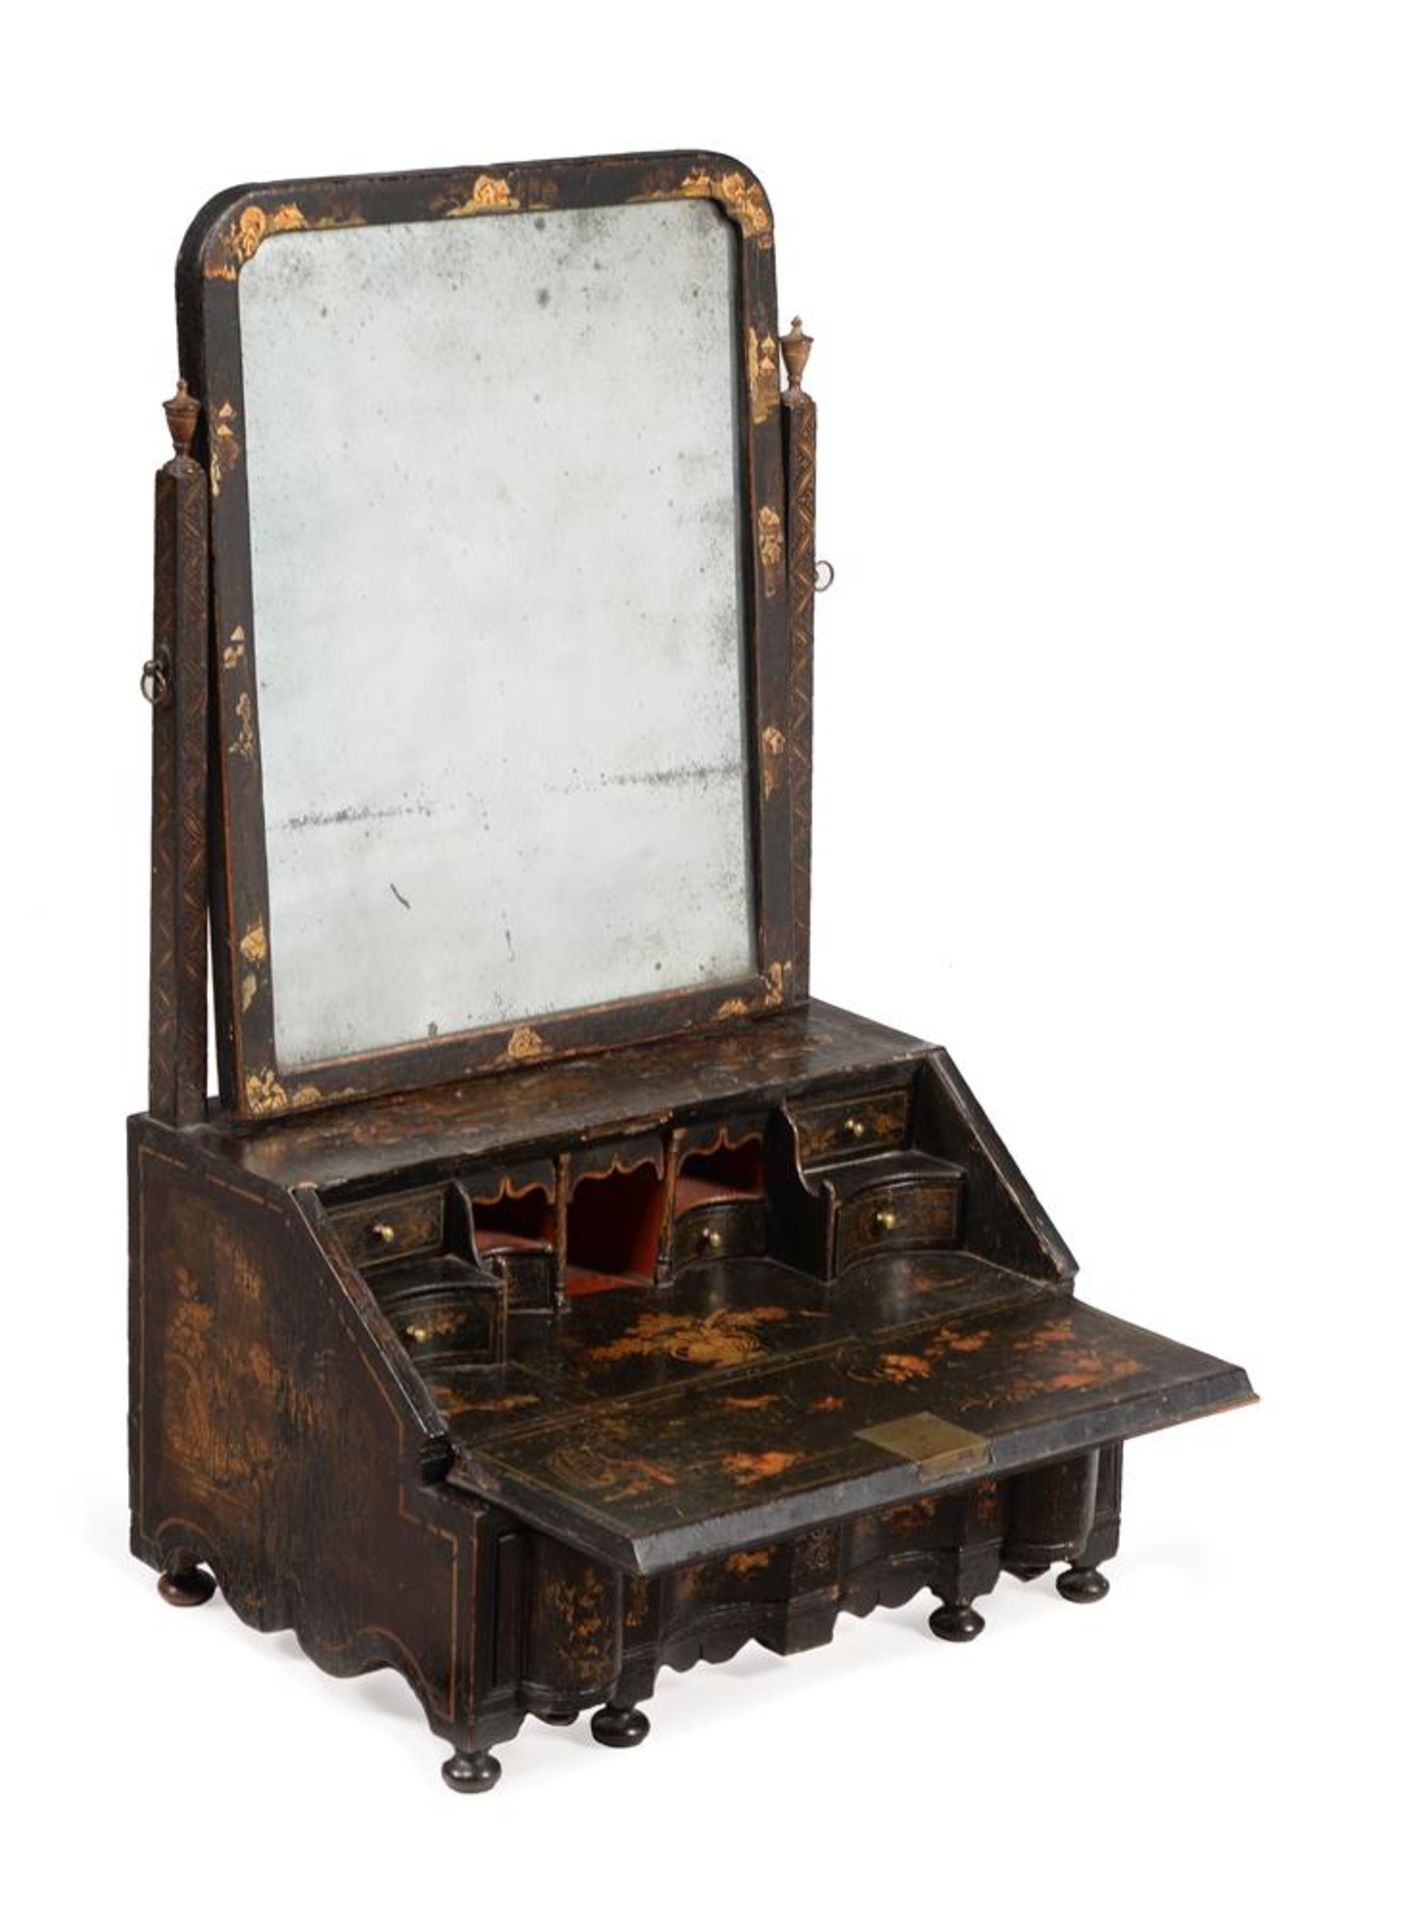 A QUEEN ANNE BLACK AND GILT JAPANNED DRESSING MIRROR, CIRCA 1710 - Image 3 of 9